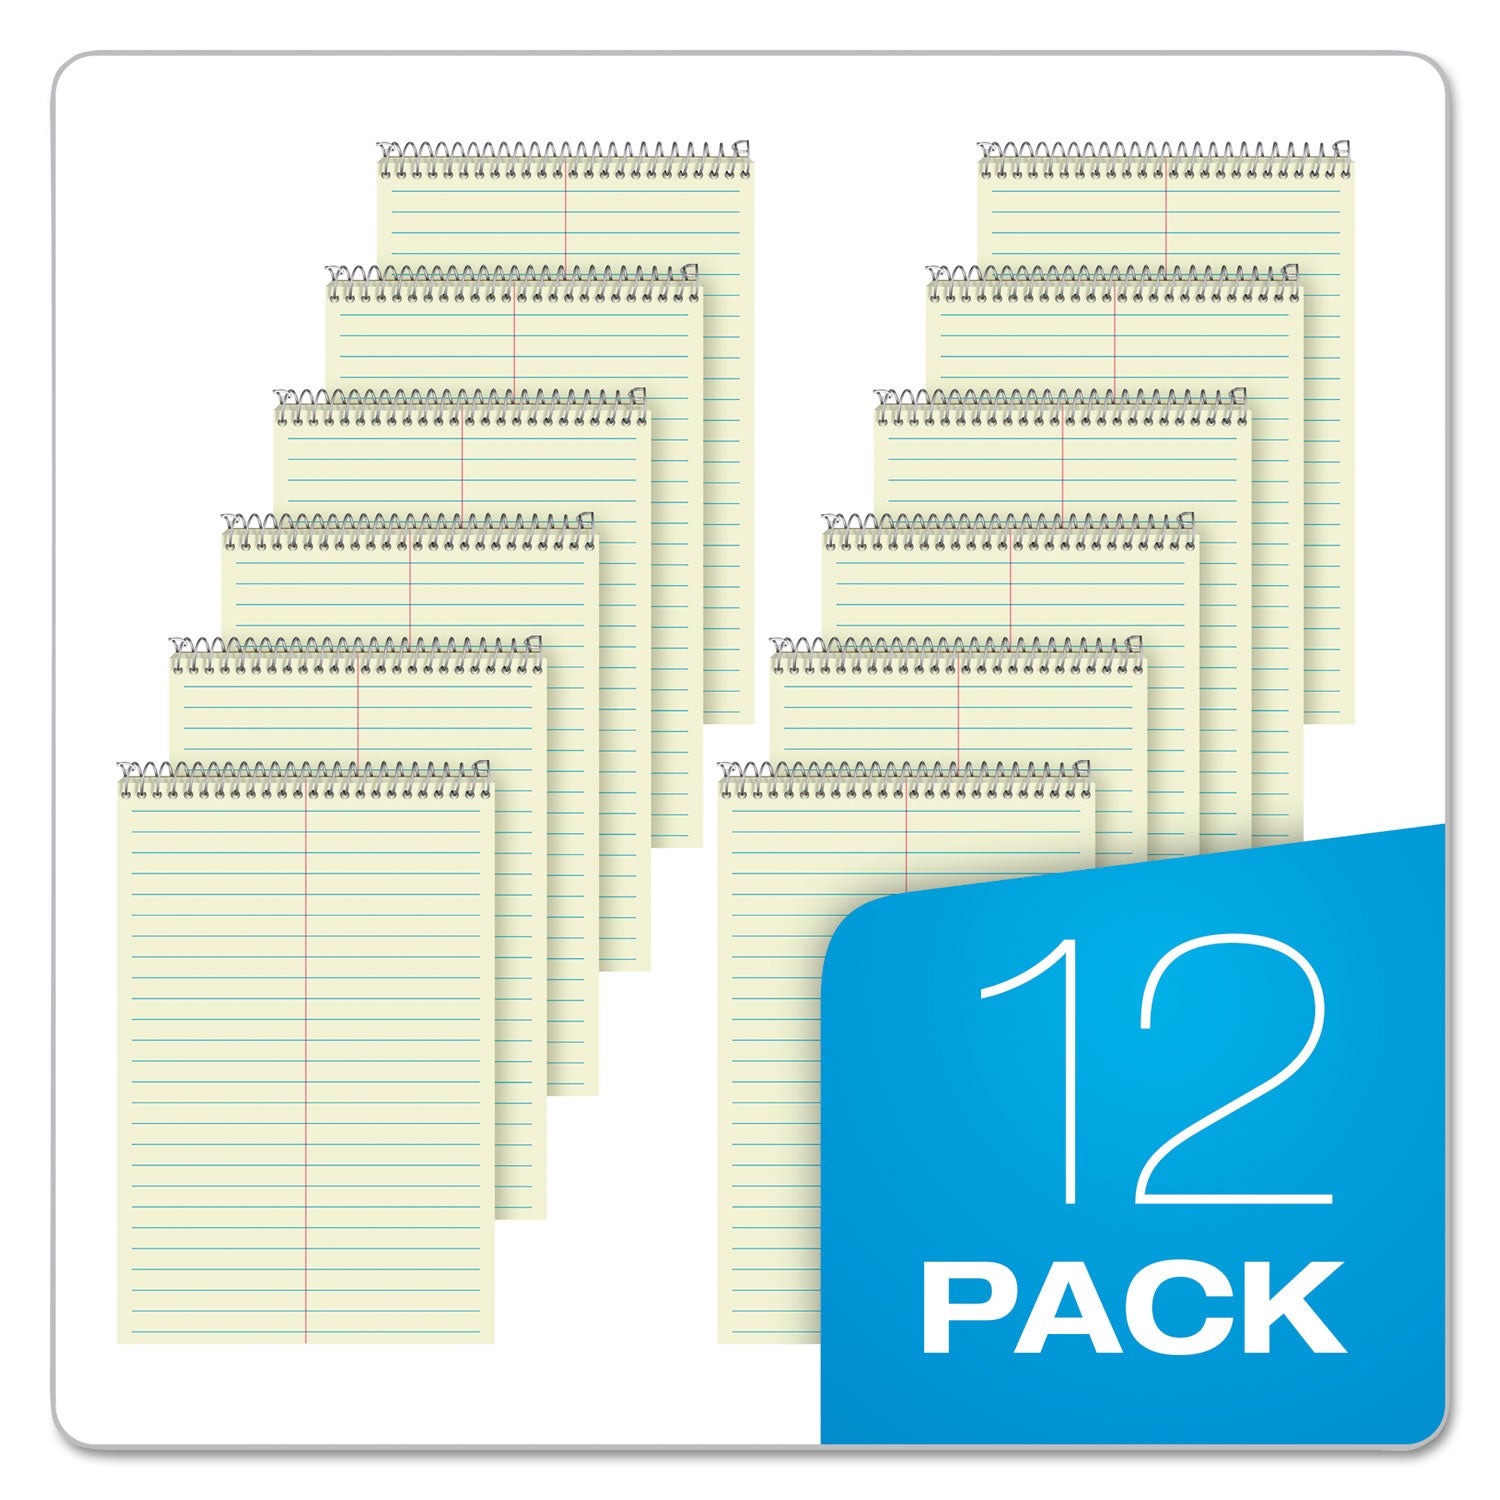 Steno Pads, Gregg Rule, Tan Cover, 80 Green-Tint 6 x 9 Sheets - 